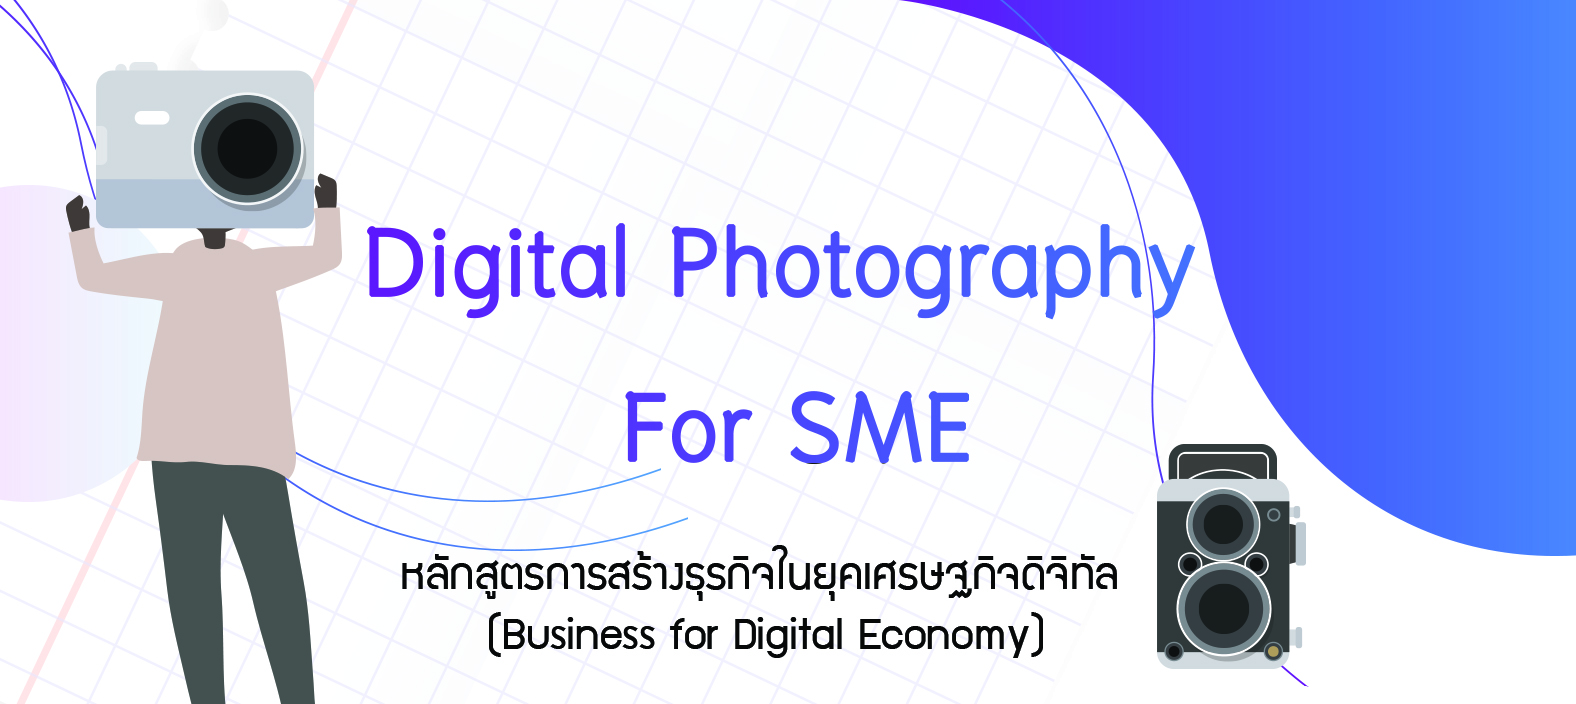 Digital Photography For SME CCDKM.MOOC